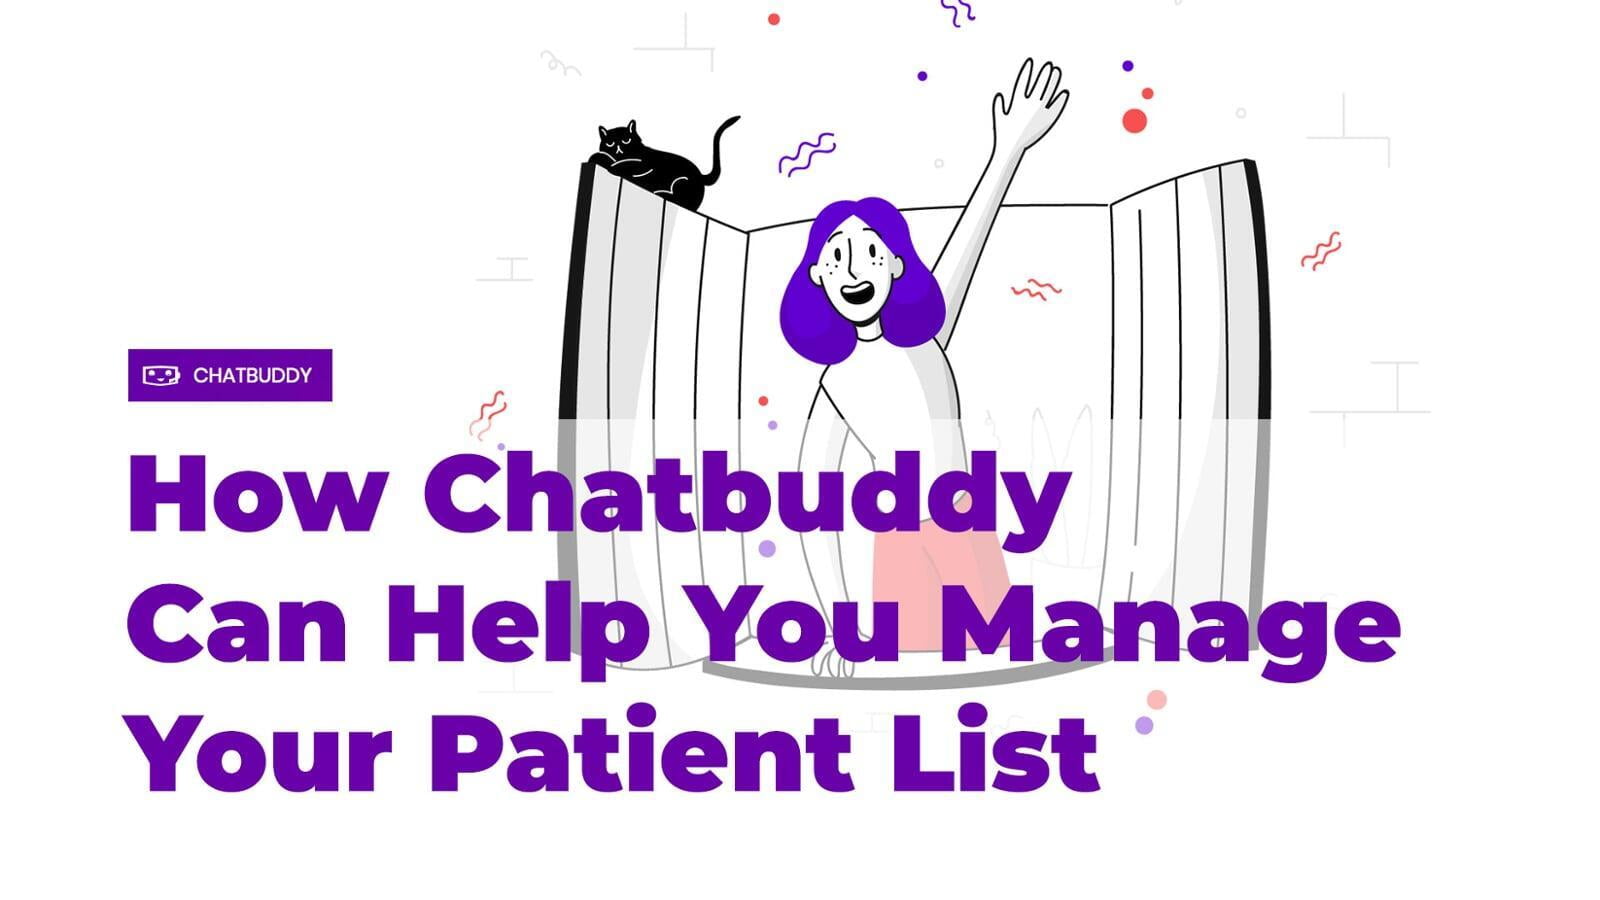 How Chatbuddy Can Help You Manage Your Patient List